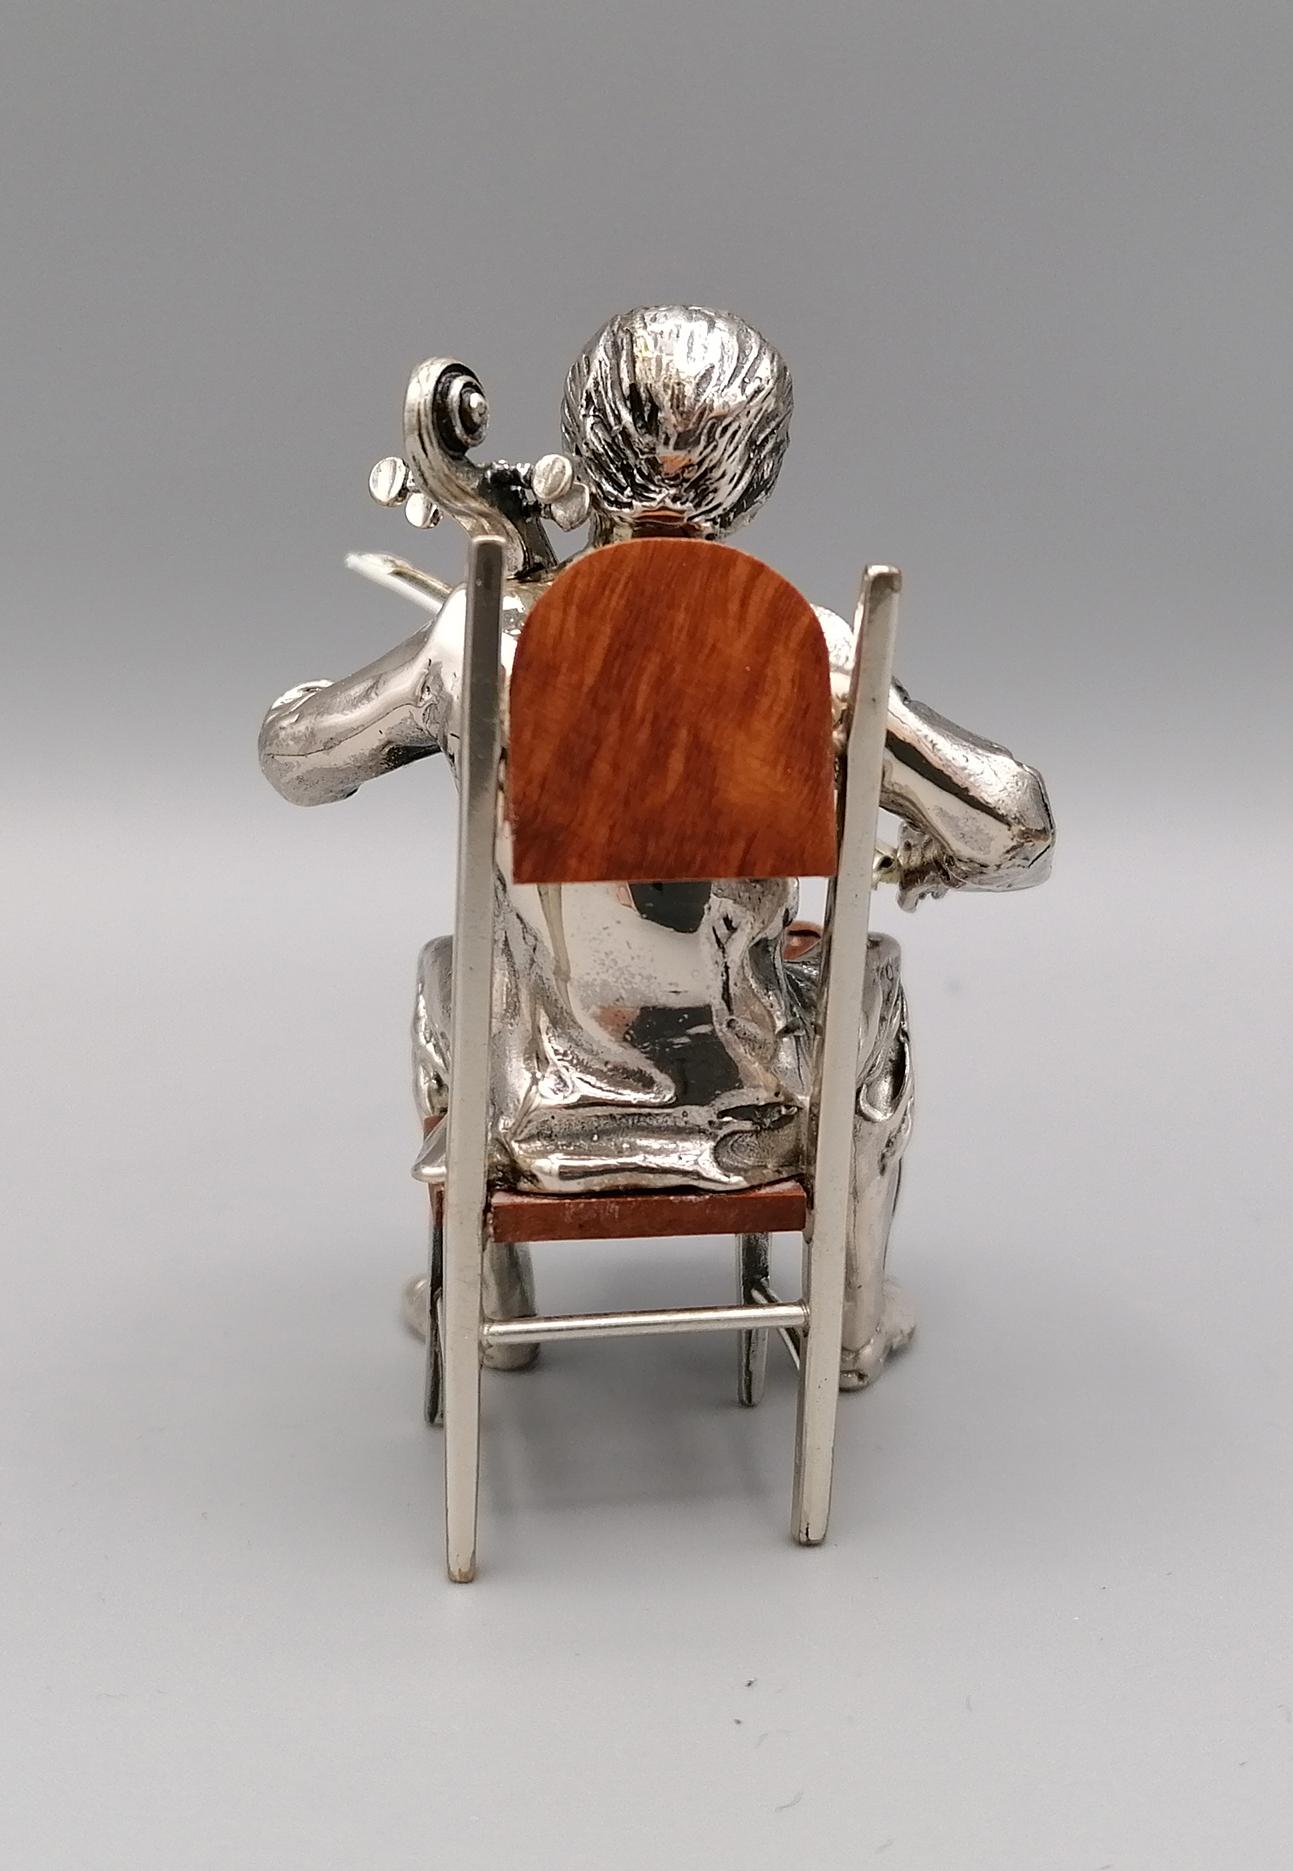 Cast 20th Century Italian Solid Silver and Briar Cello Player with Chair